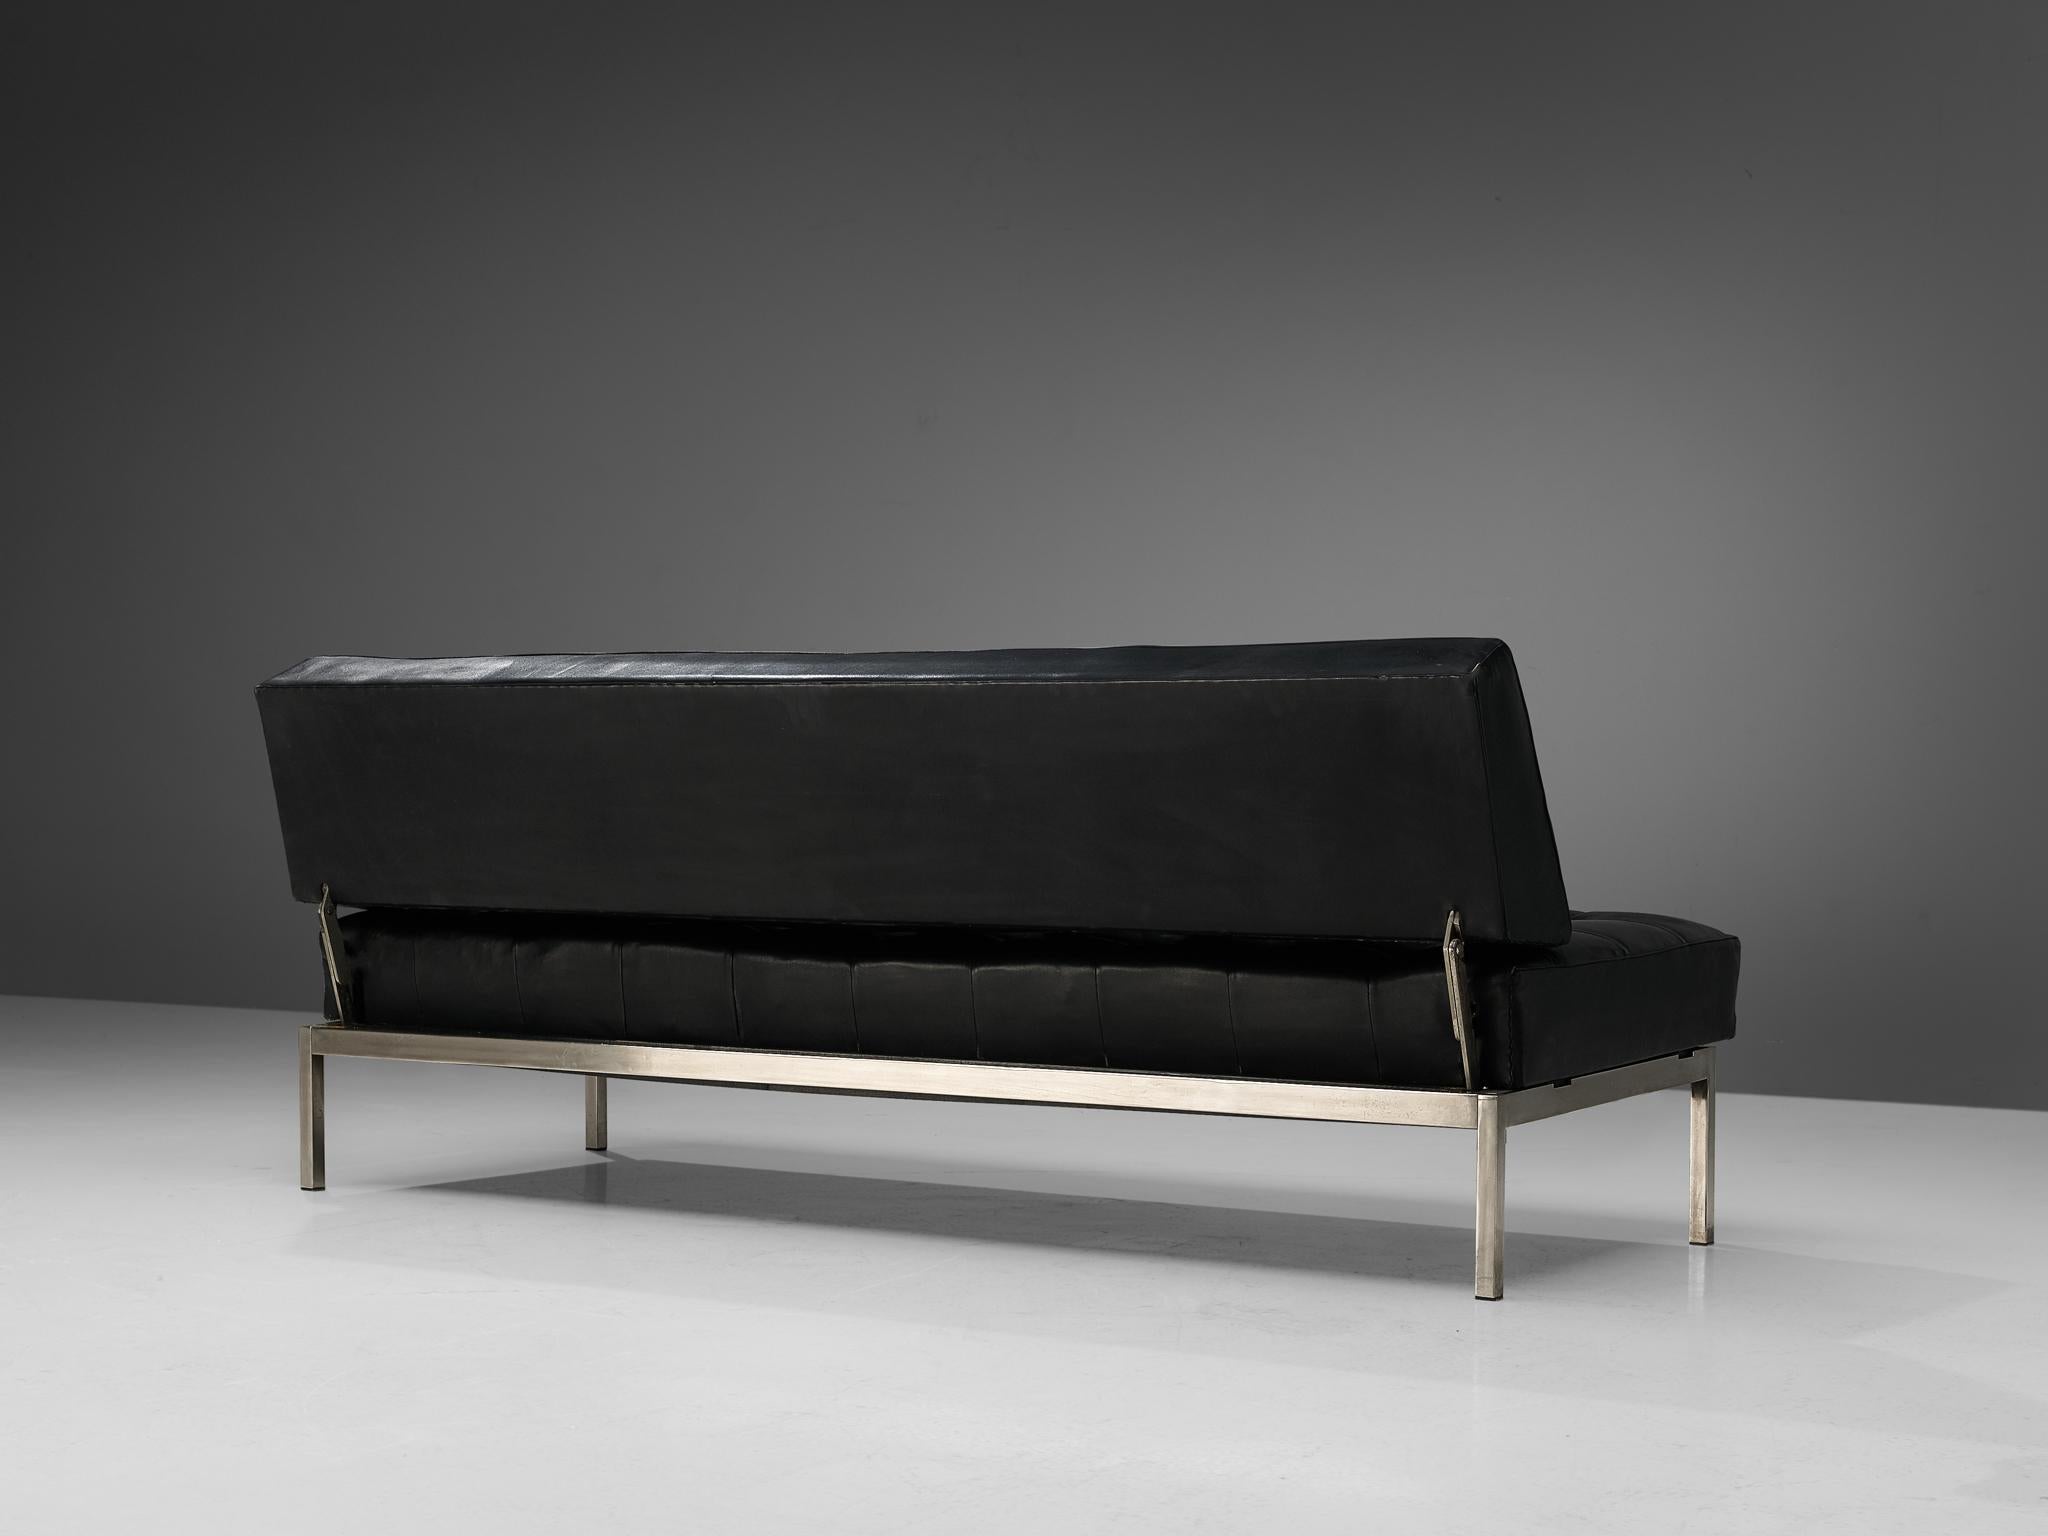 Austrian Johannes Spalt 'Constanze' Sofa Daybed in Black Leather and Steel  For Sale